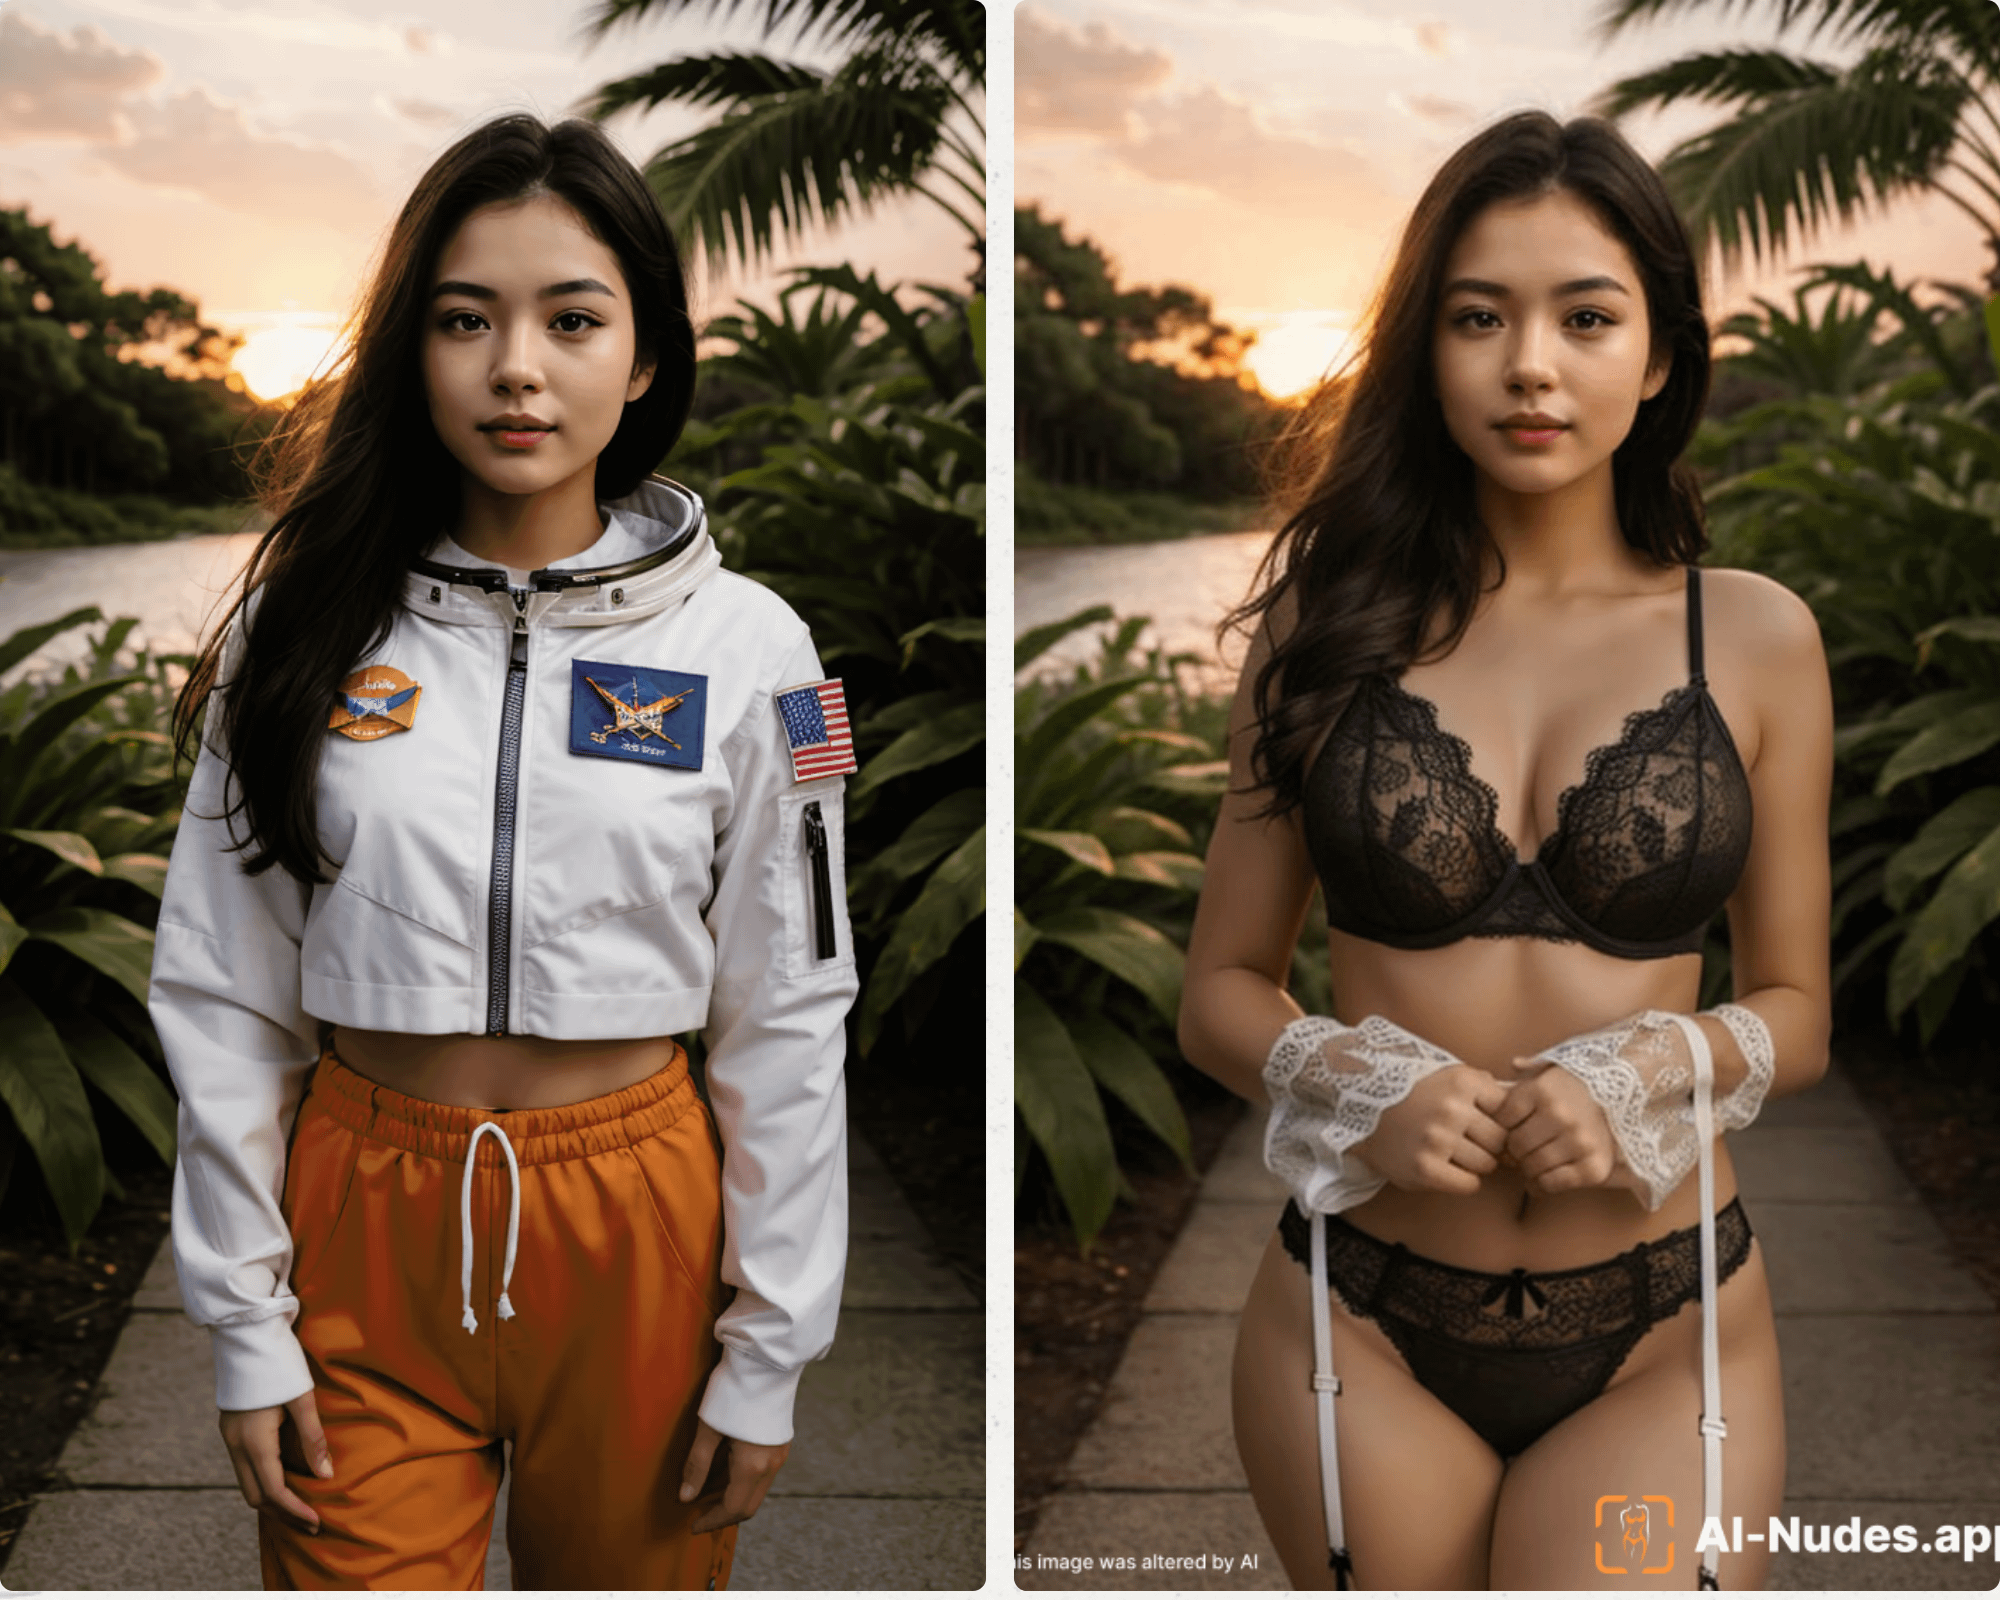 Astronaut babe or sexy housewife, pick wisely.